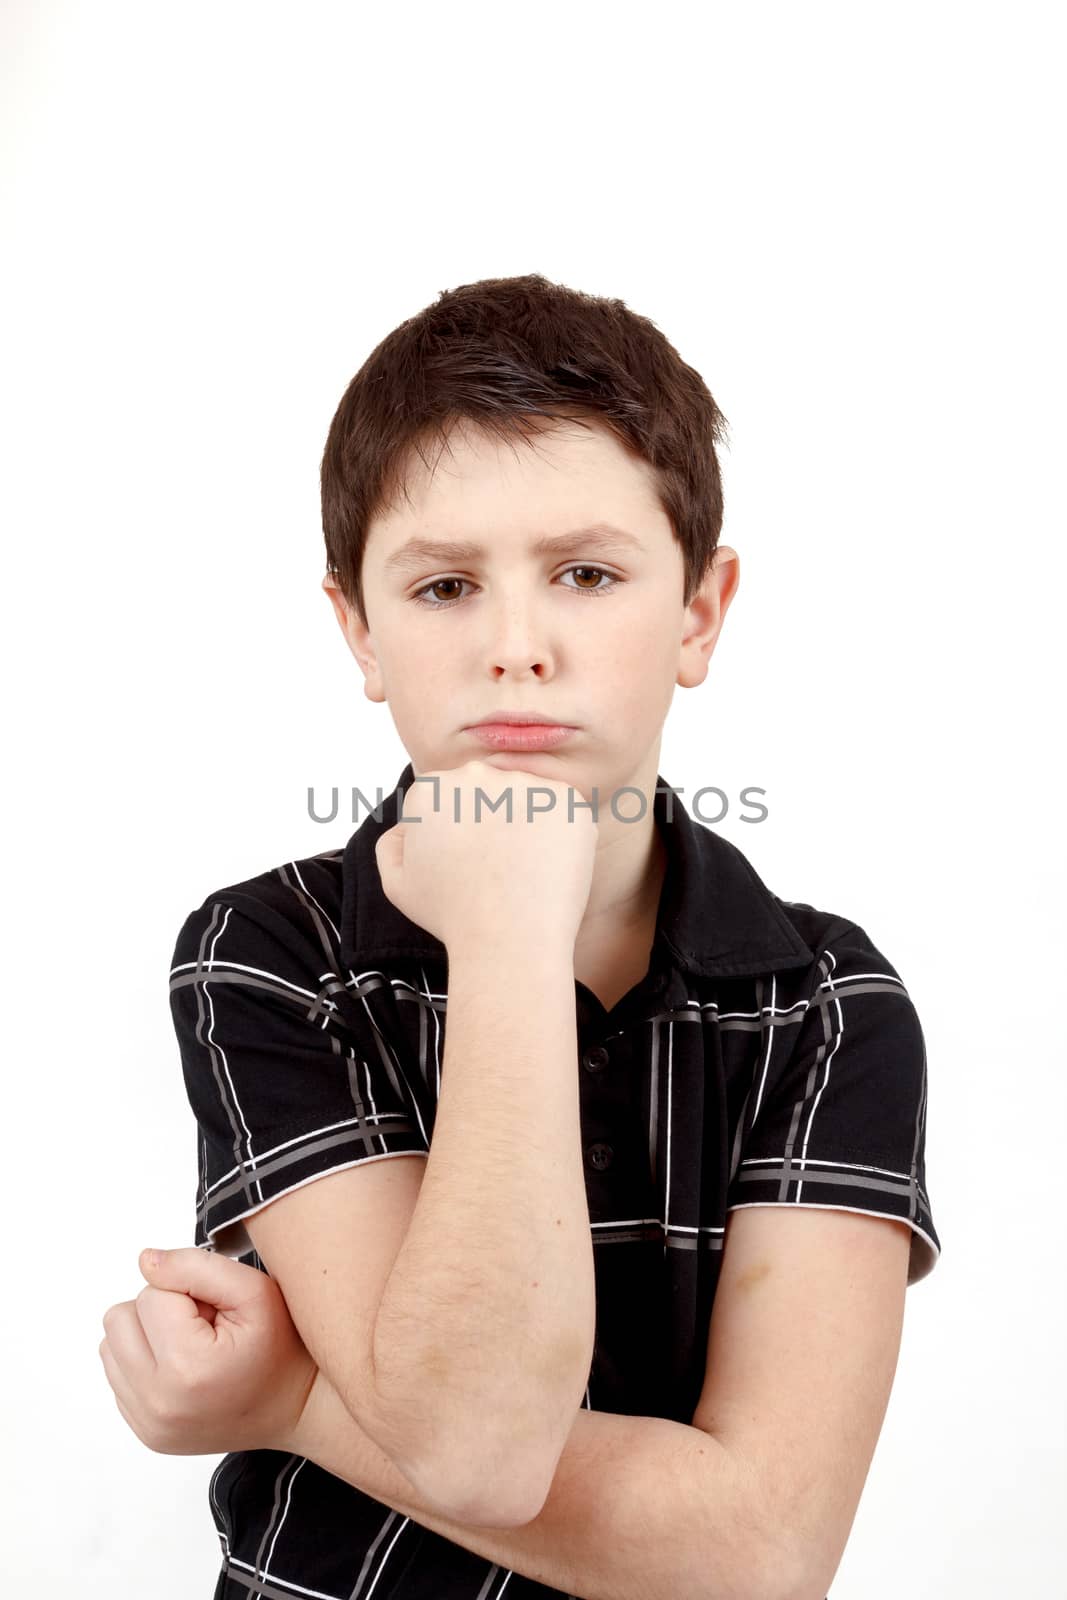 pensive young boy with hand on head isolated on white background